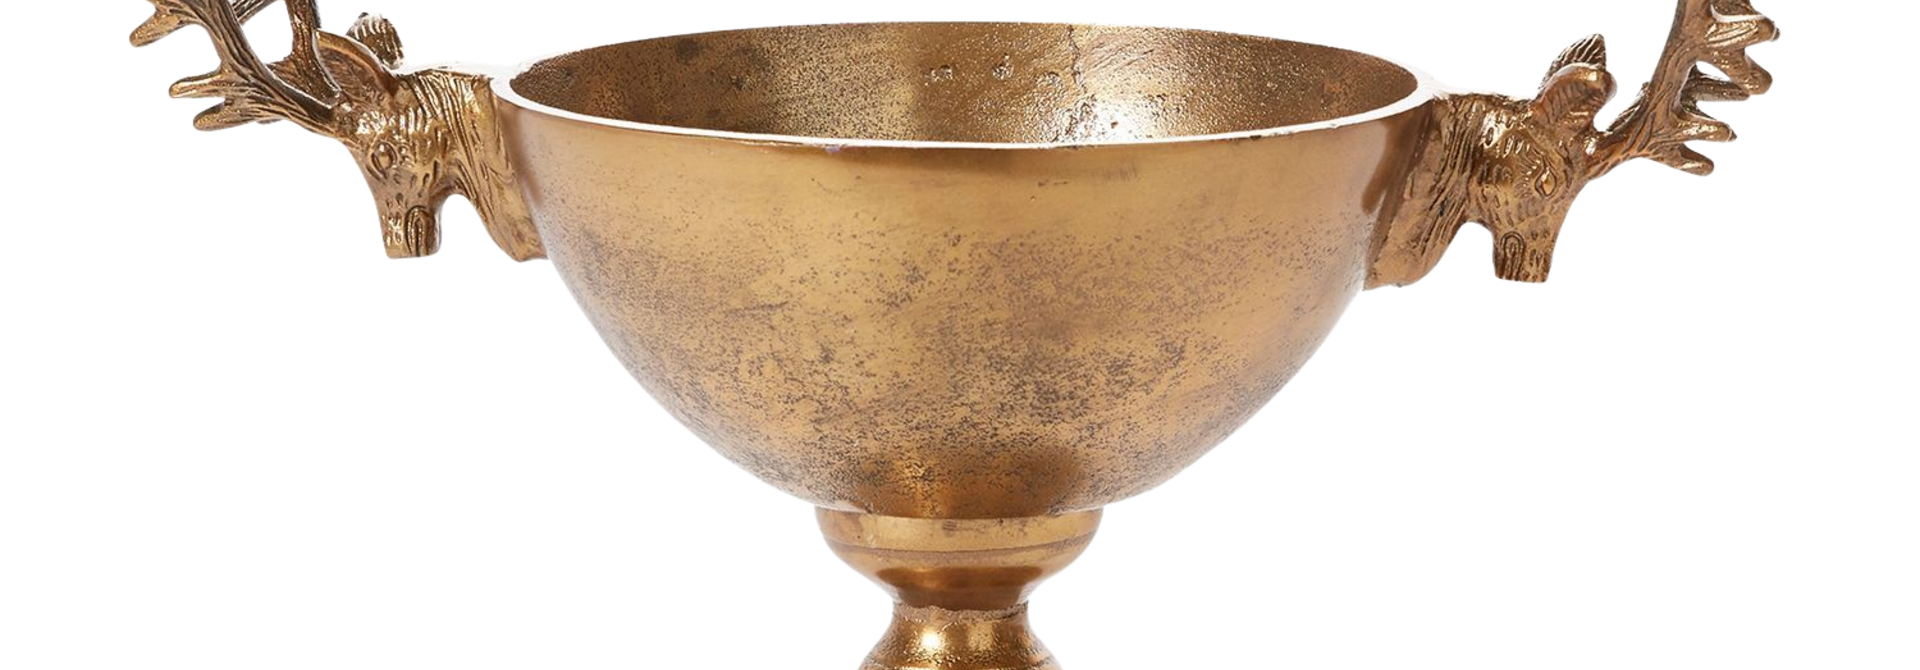 Buck Chalice | The Bowl Collection, Antique Gold - 16 Inch x 9.25 Inch x 11 Inch